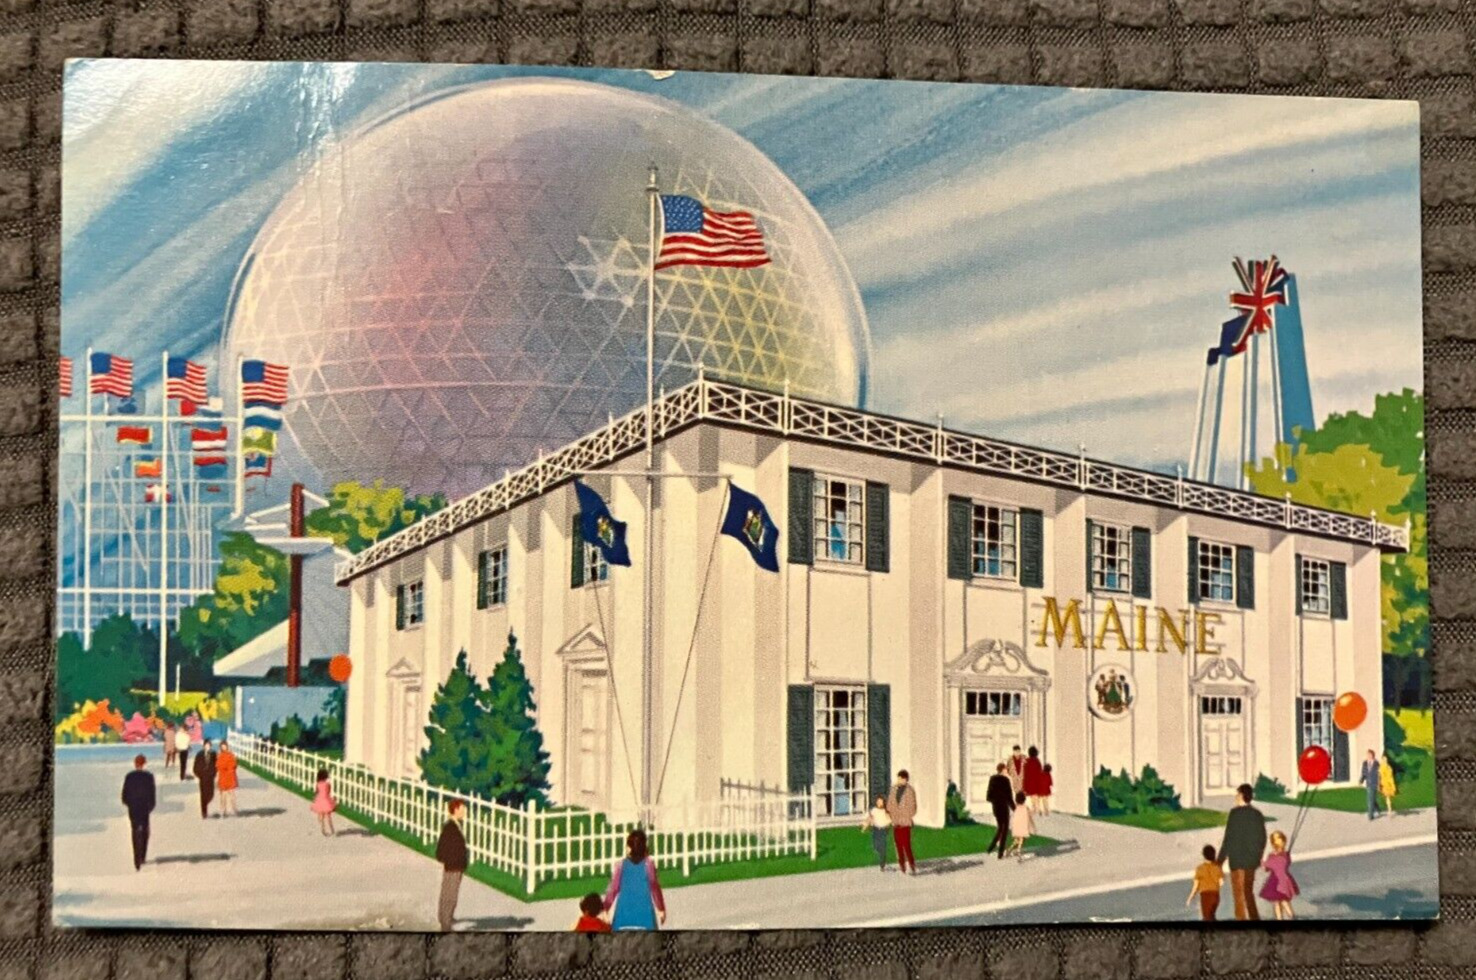 Antique Postcard - Maine Pavilion Expo \'67 in Montreal, Quebec, Canada - POSTED